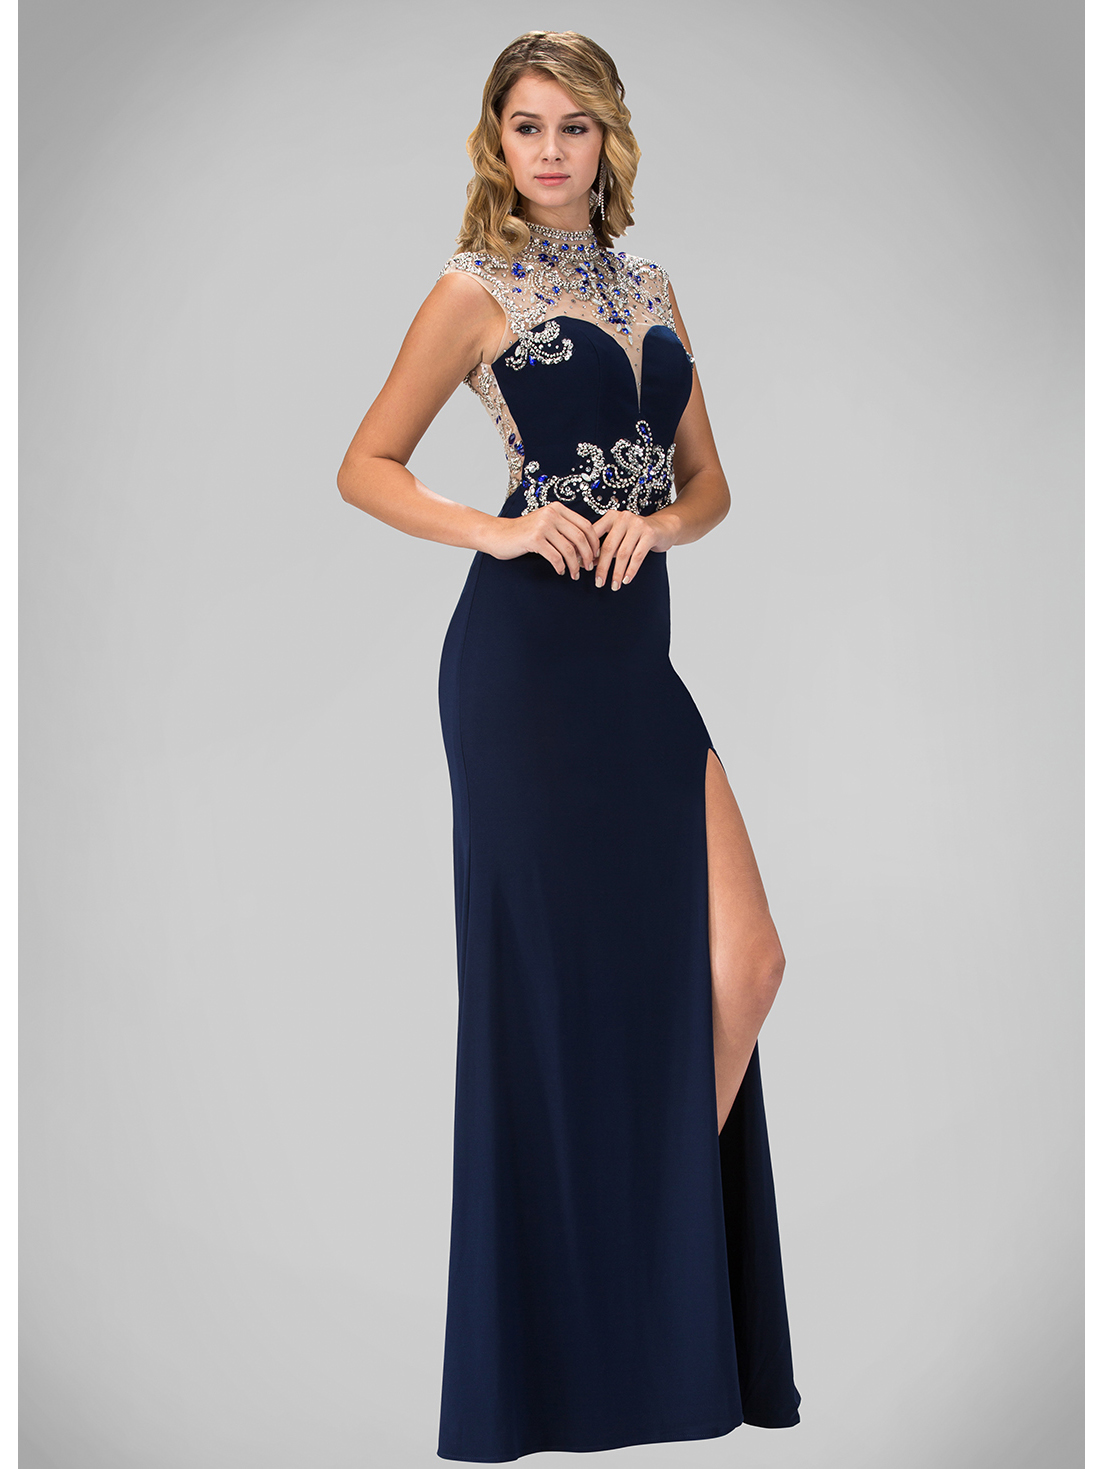 evening dresses with high neck